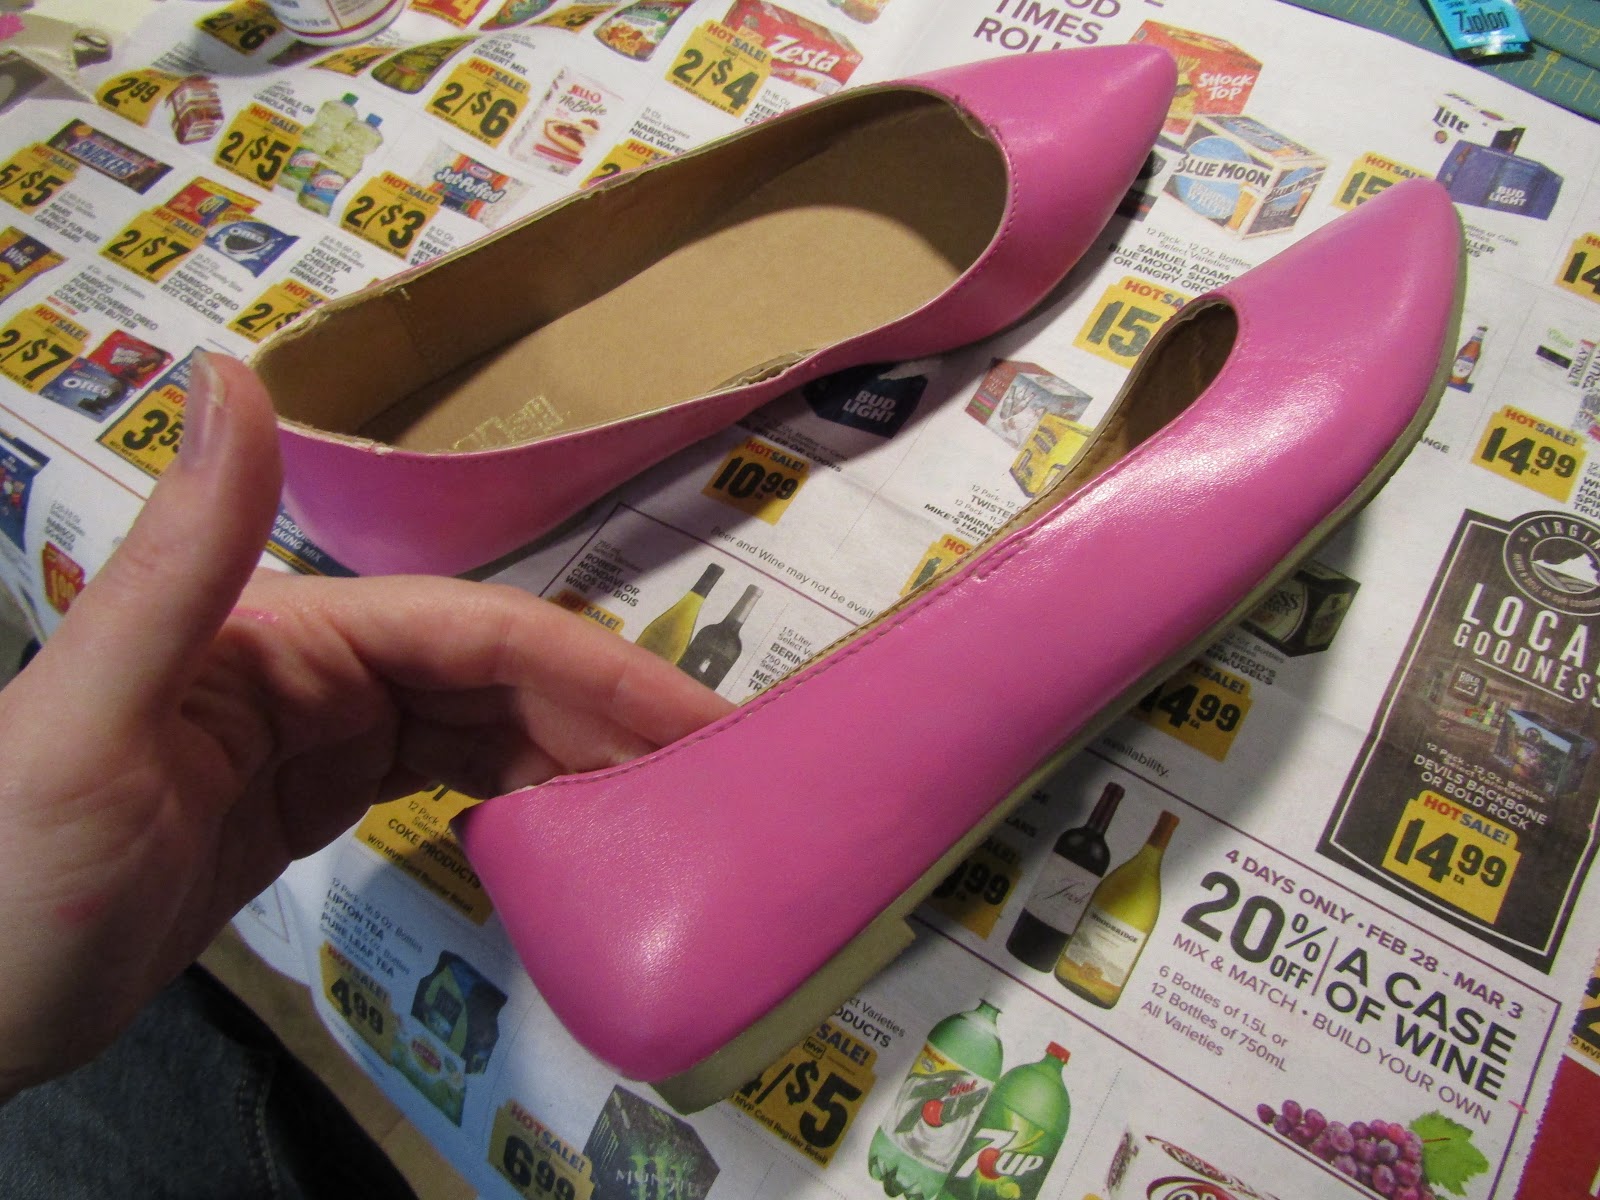 A Sartorial Statement: Pink Painted Shoes